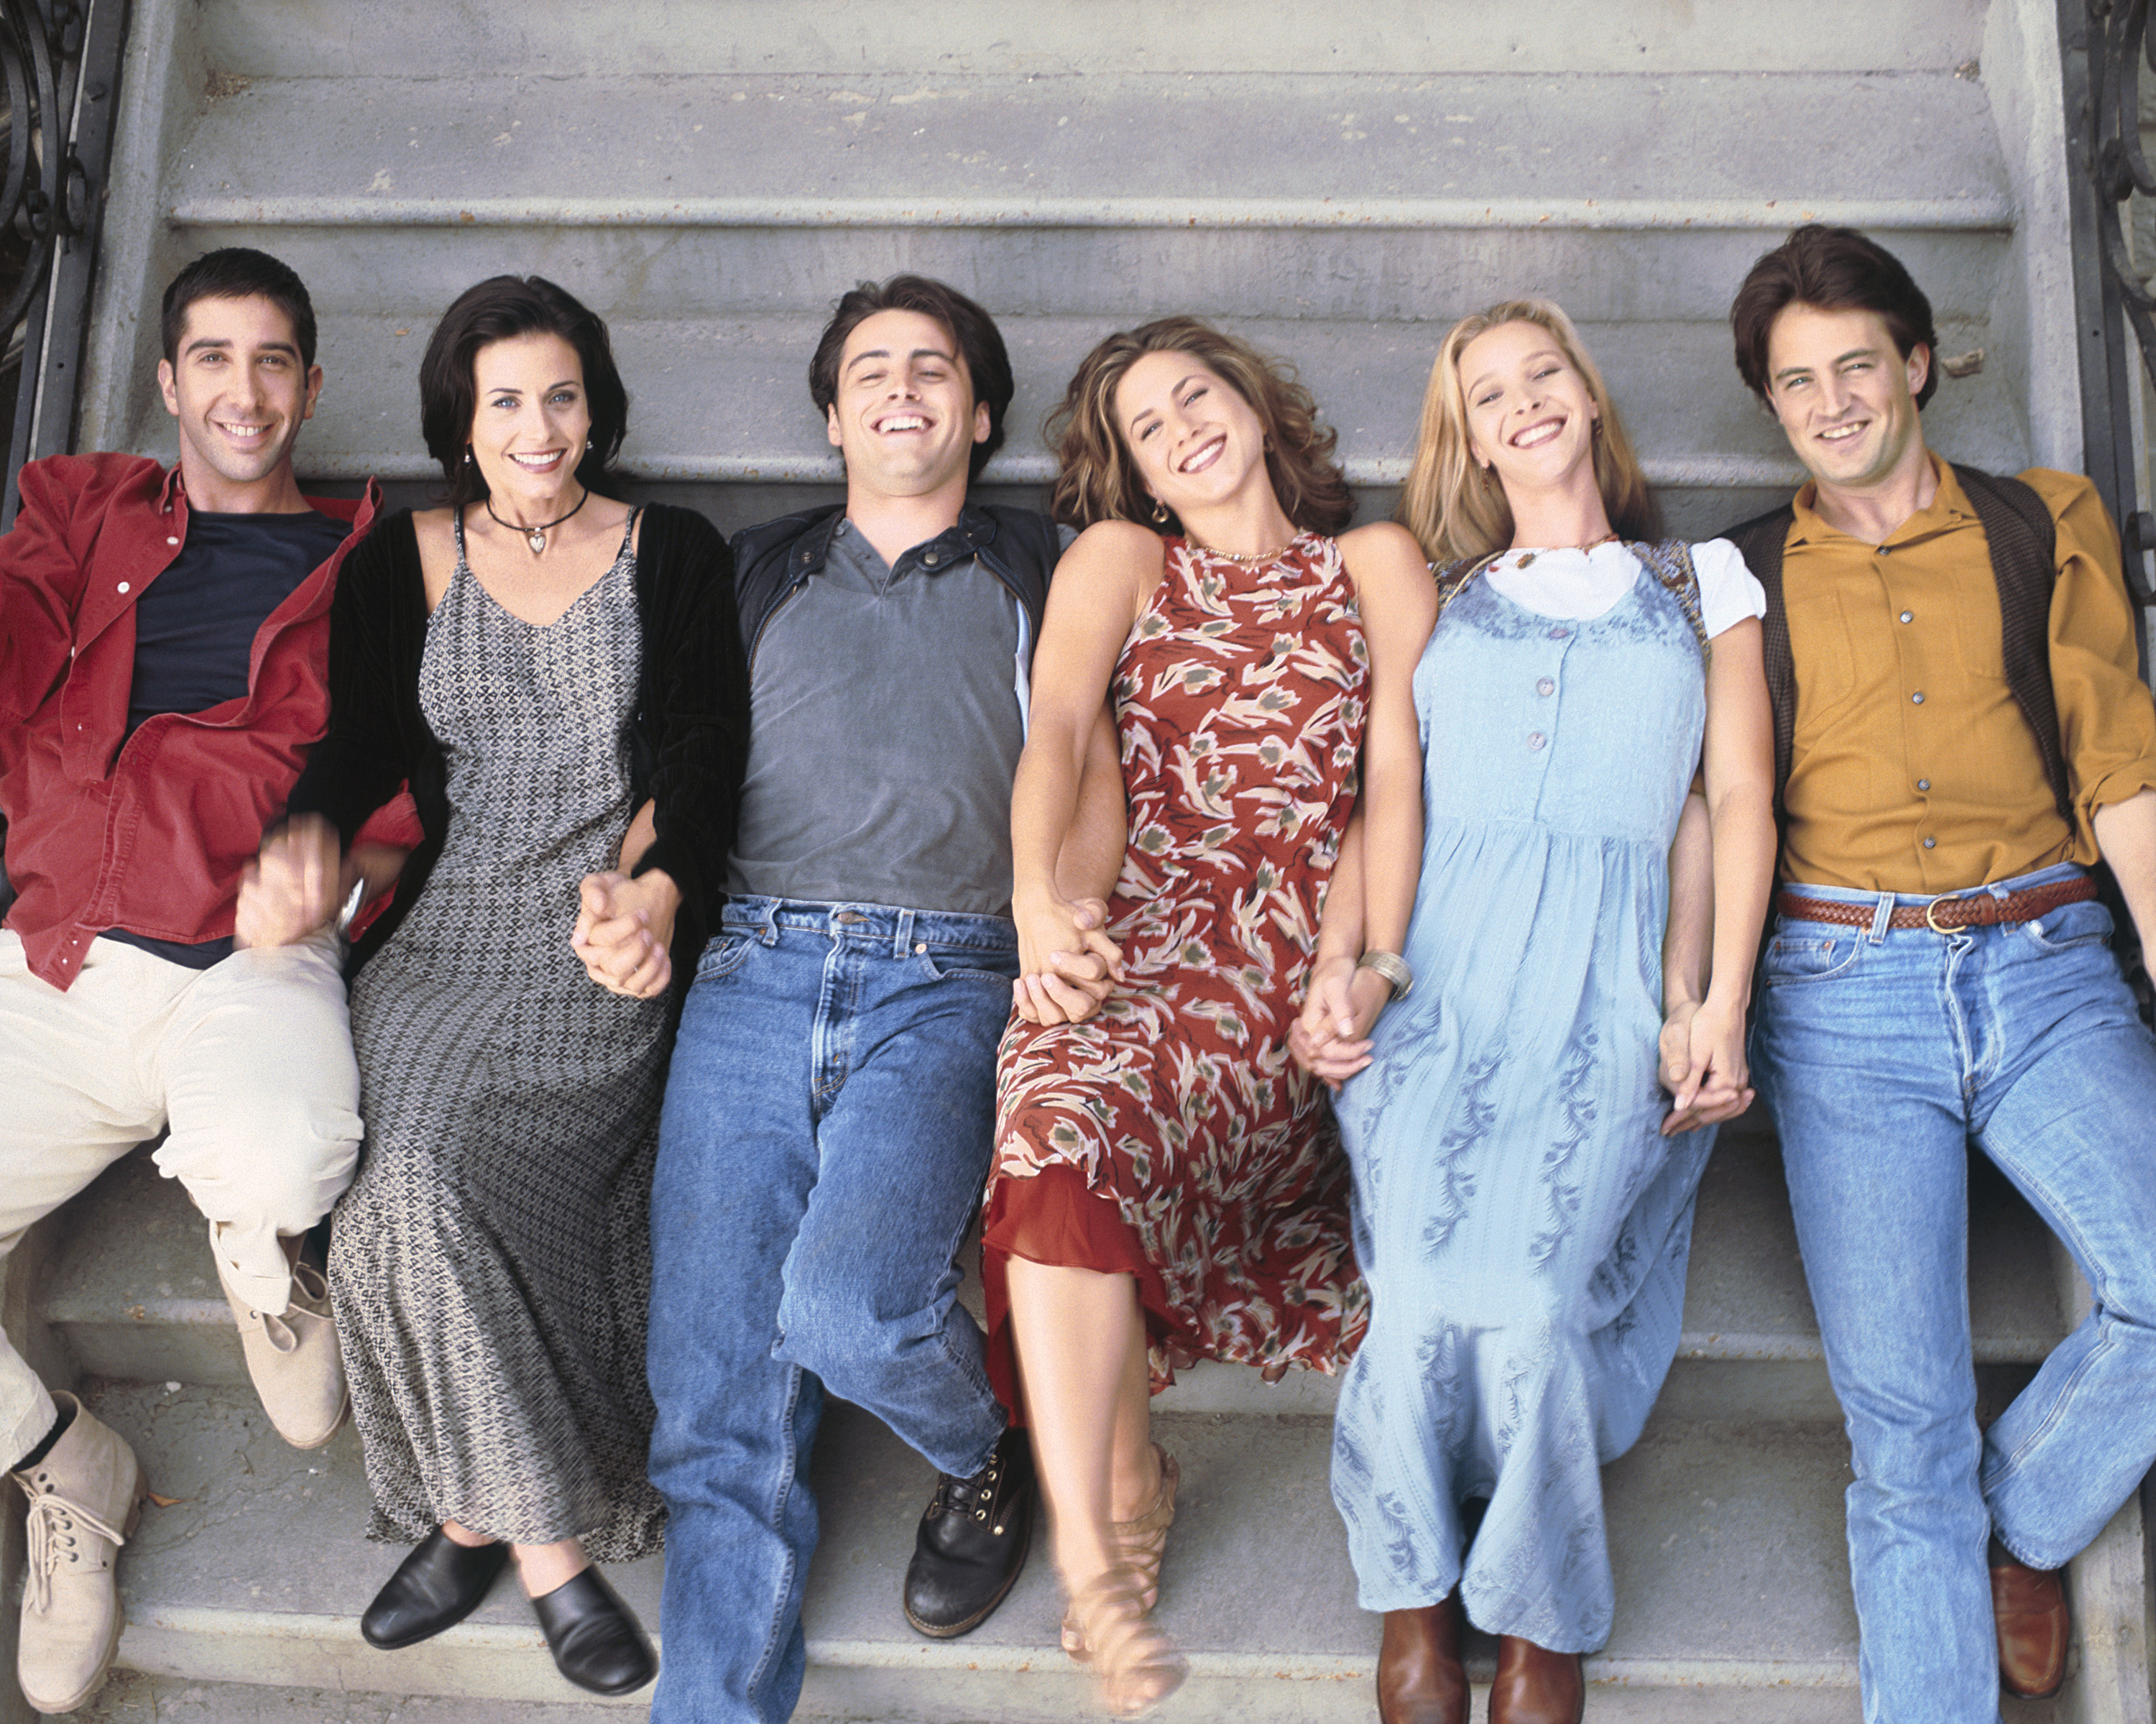 Friends: The Musical Set to Open Off-Broadway This Fall | Time